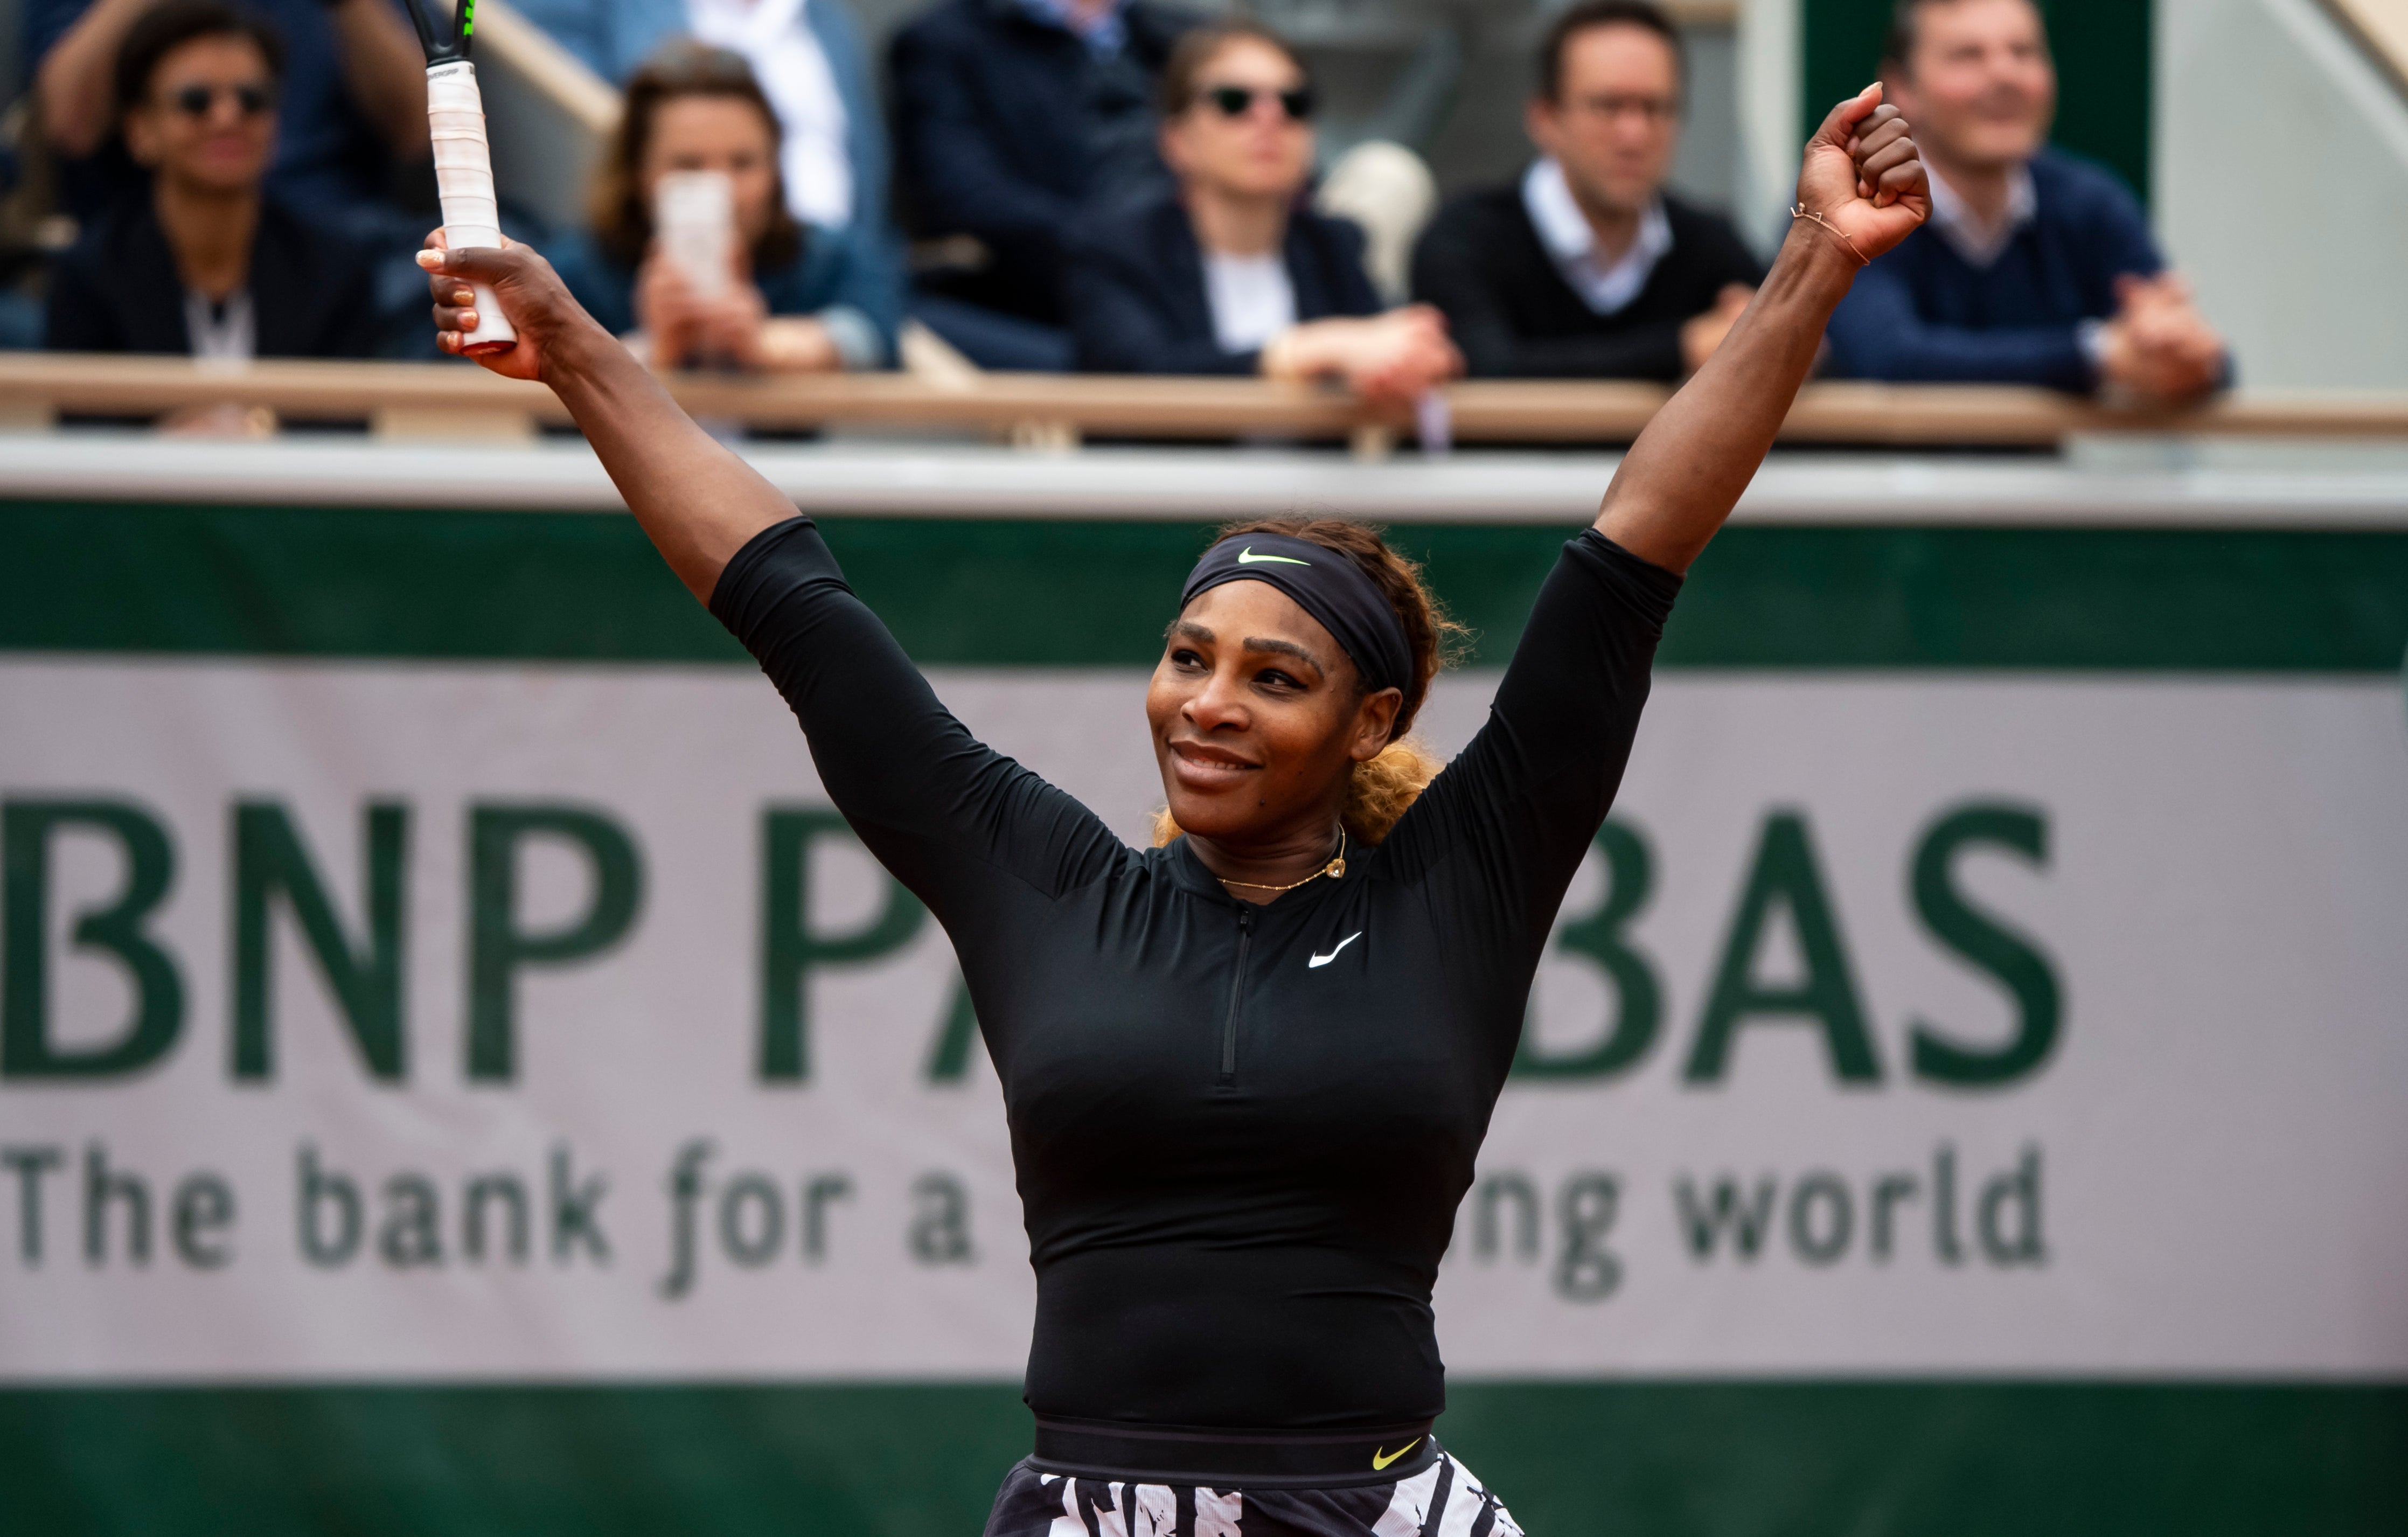 Serena Williams Responds To Critics: 'The Day I Stop Fighting for Equality Will Be the Day I'm in My Grave'